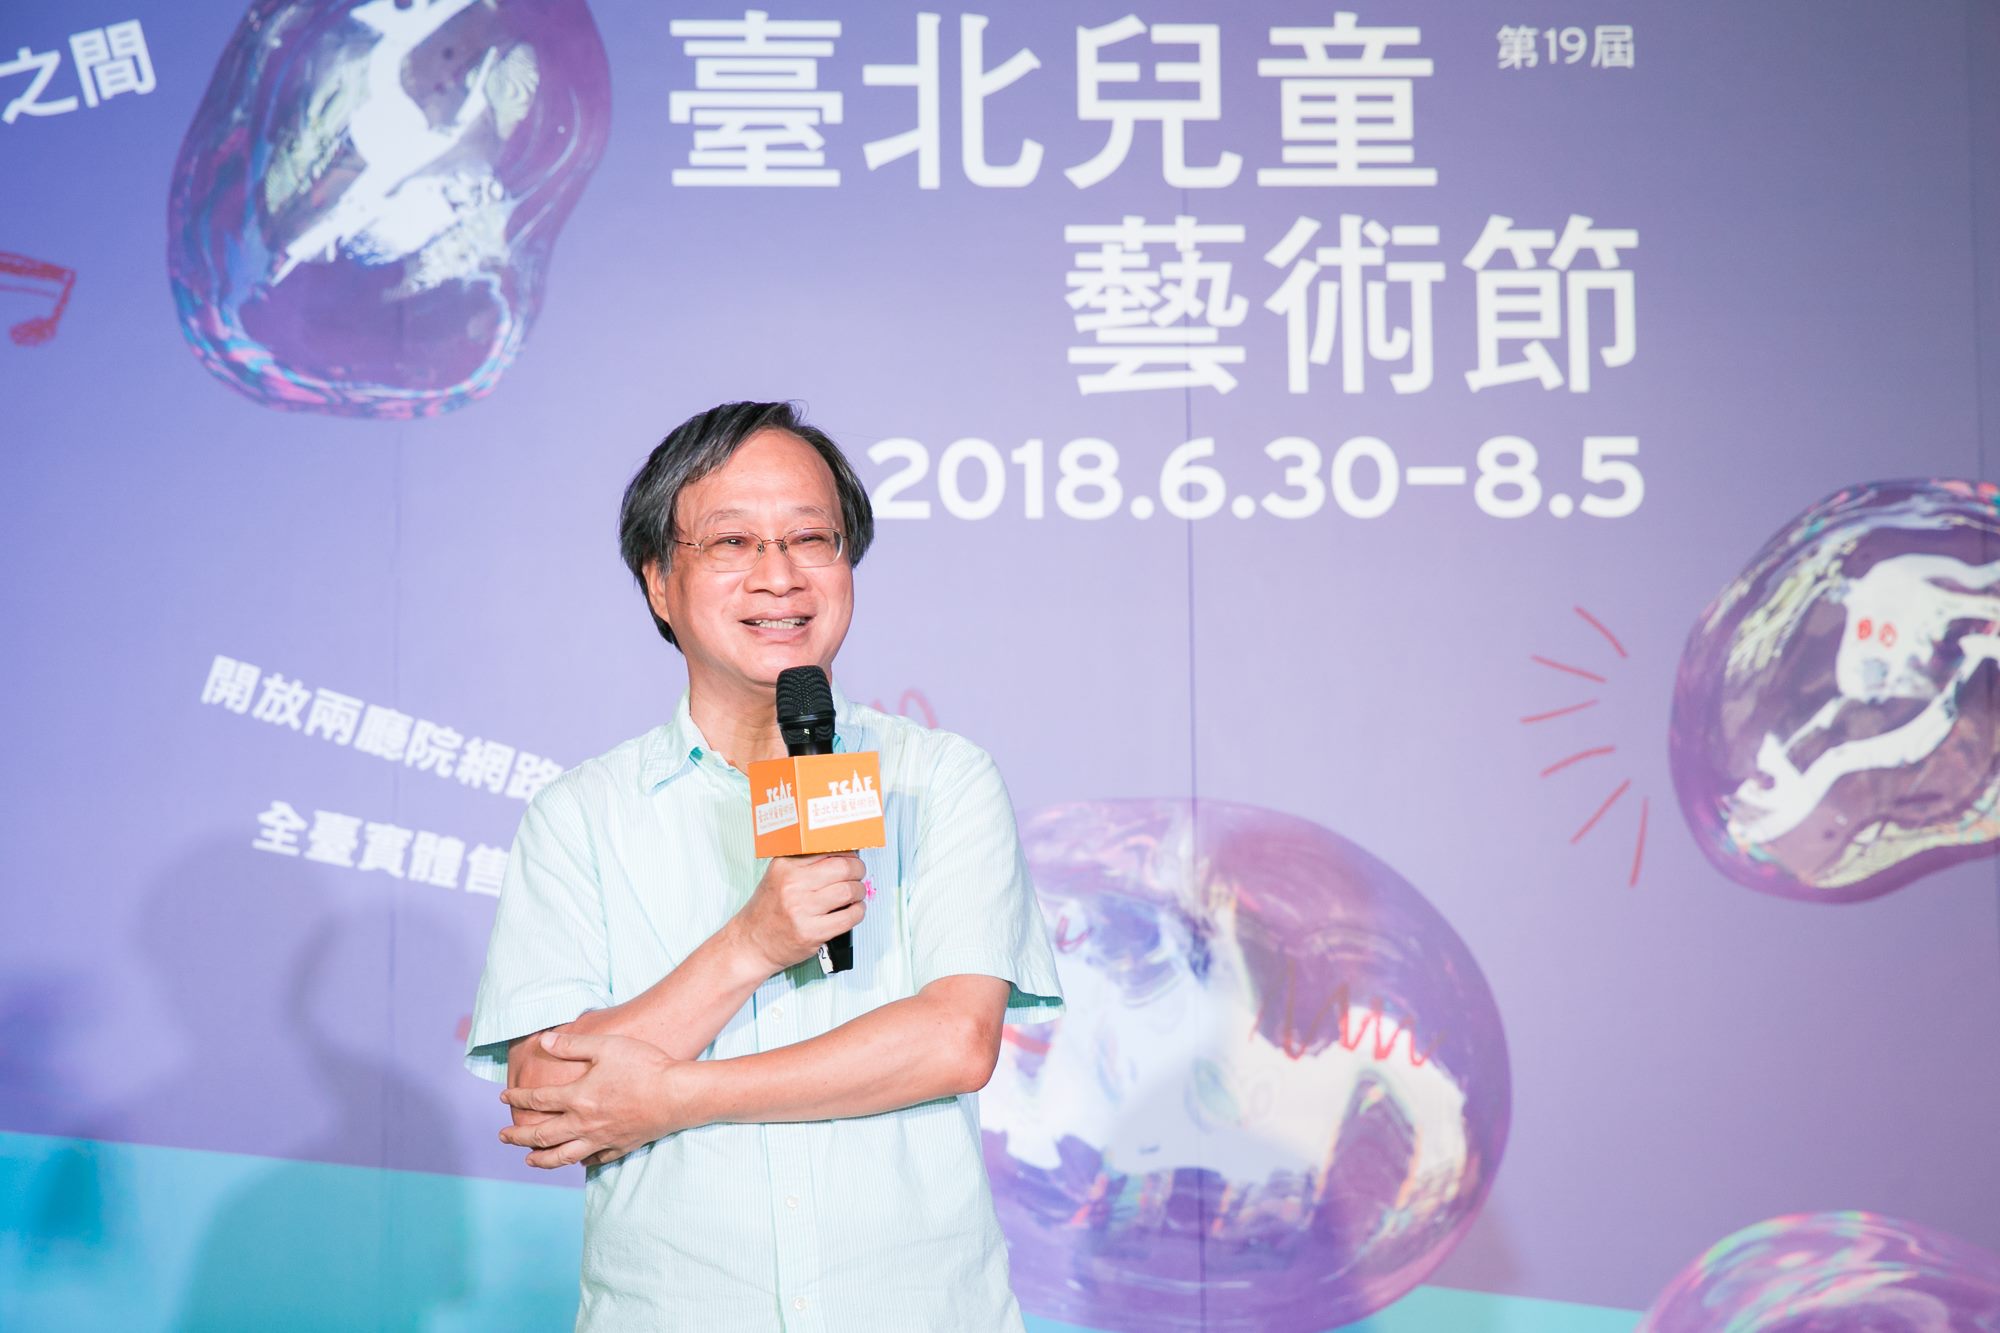 Taipei Culture Foundation Chairman Li Yuan, alias “Hsiao Yeh,” shares how to spend time with his four grandchildren.